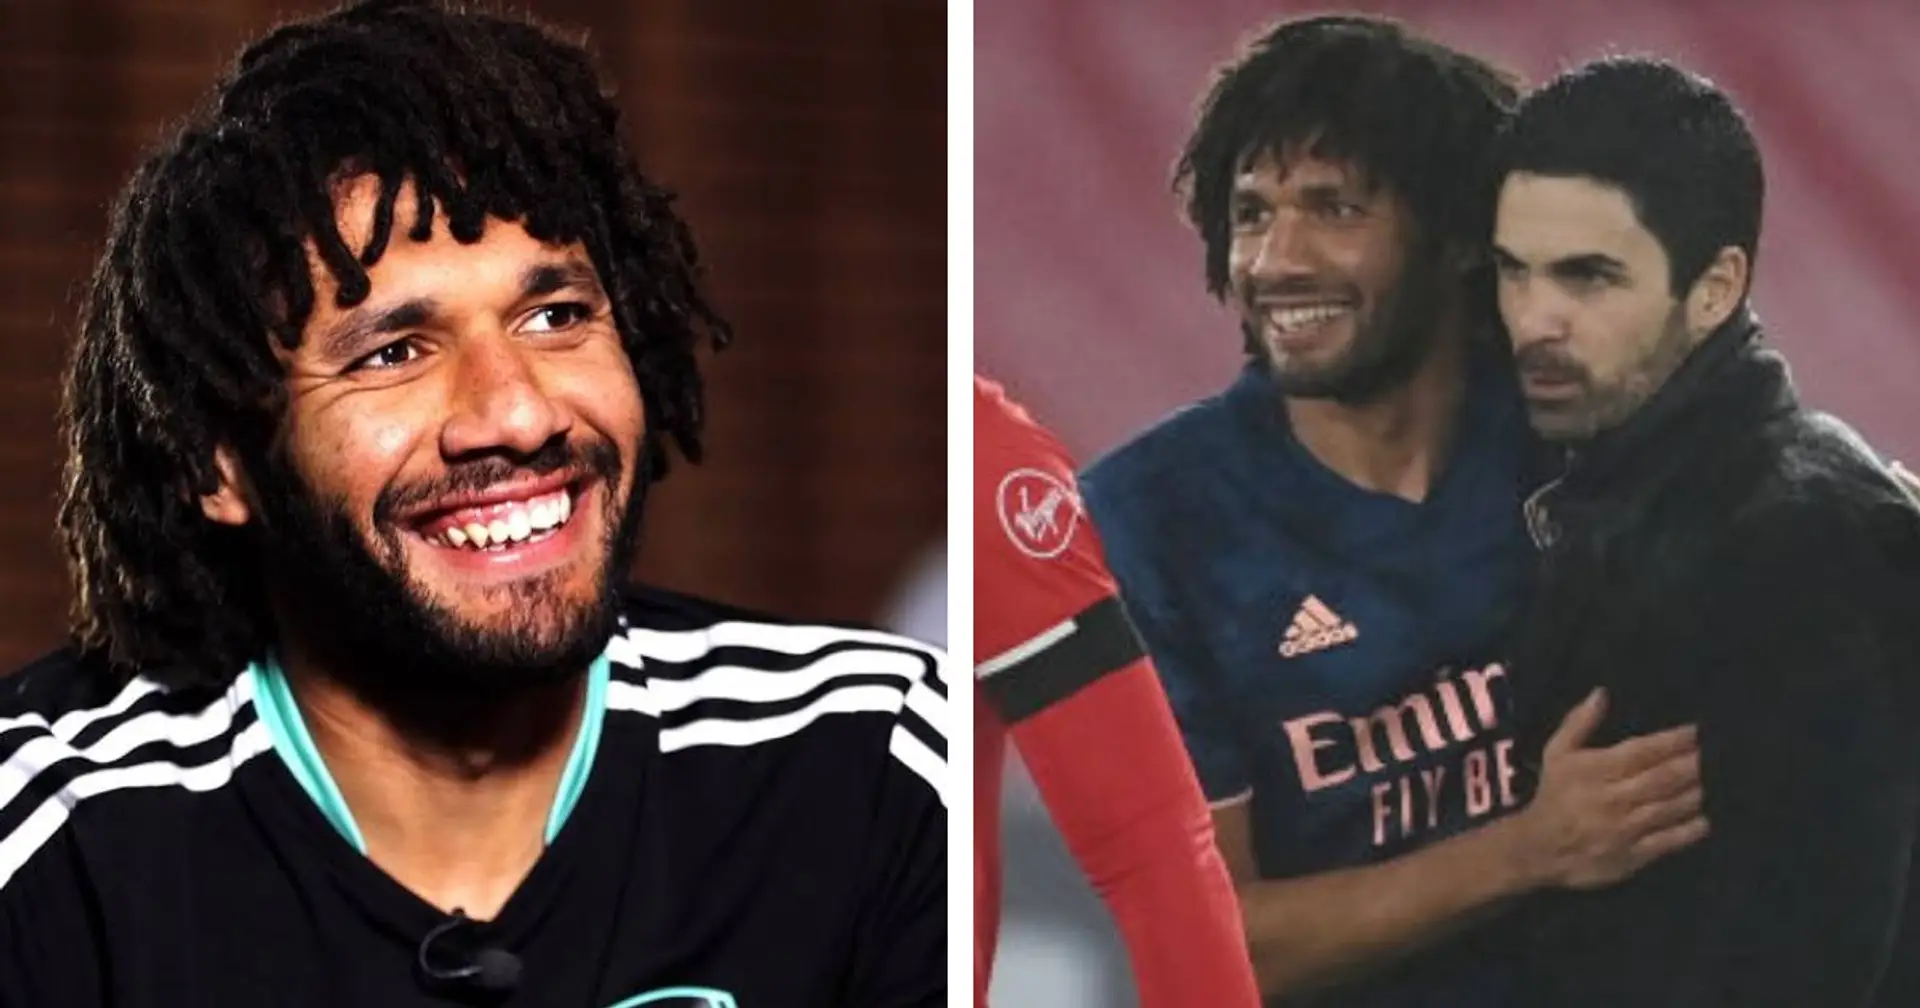 'I don't want to leave': Mohamed Elneny wants to finish career at Arsenal